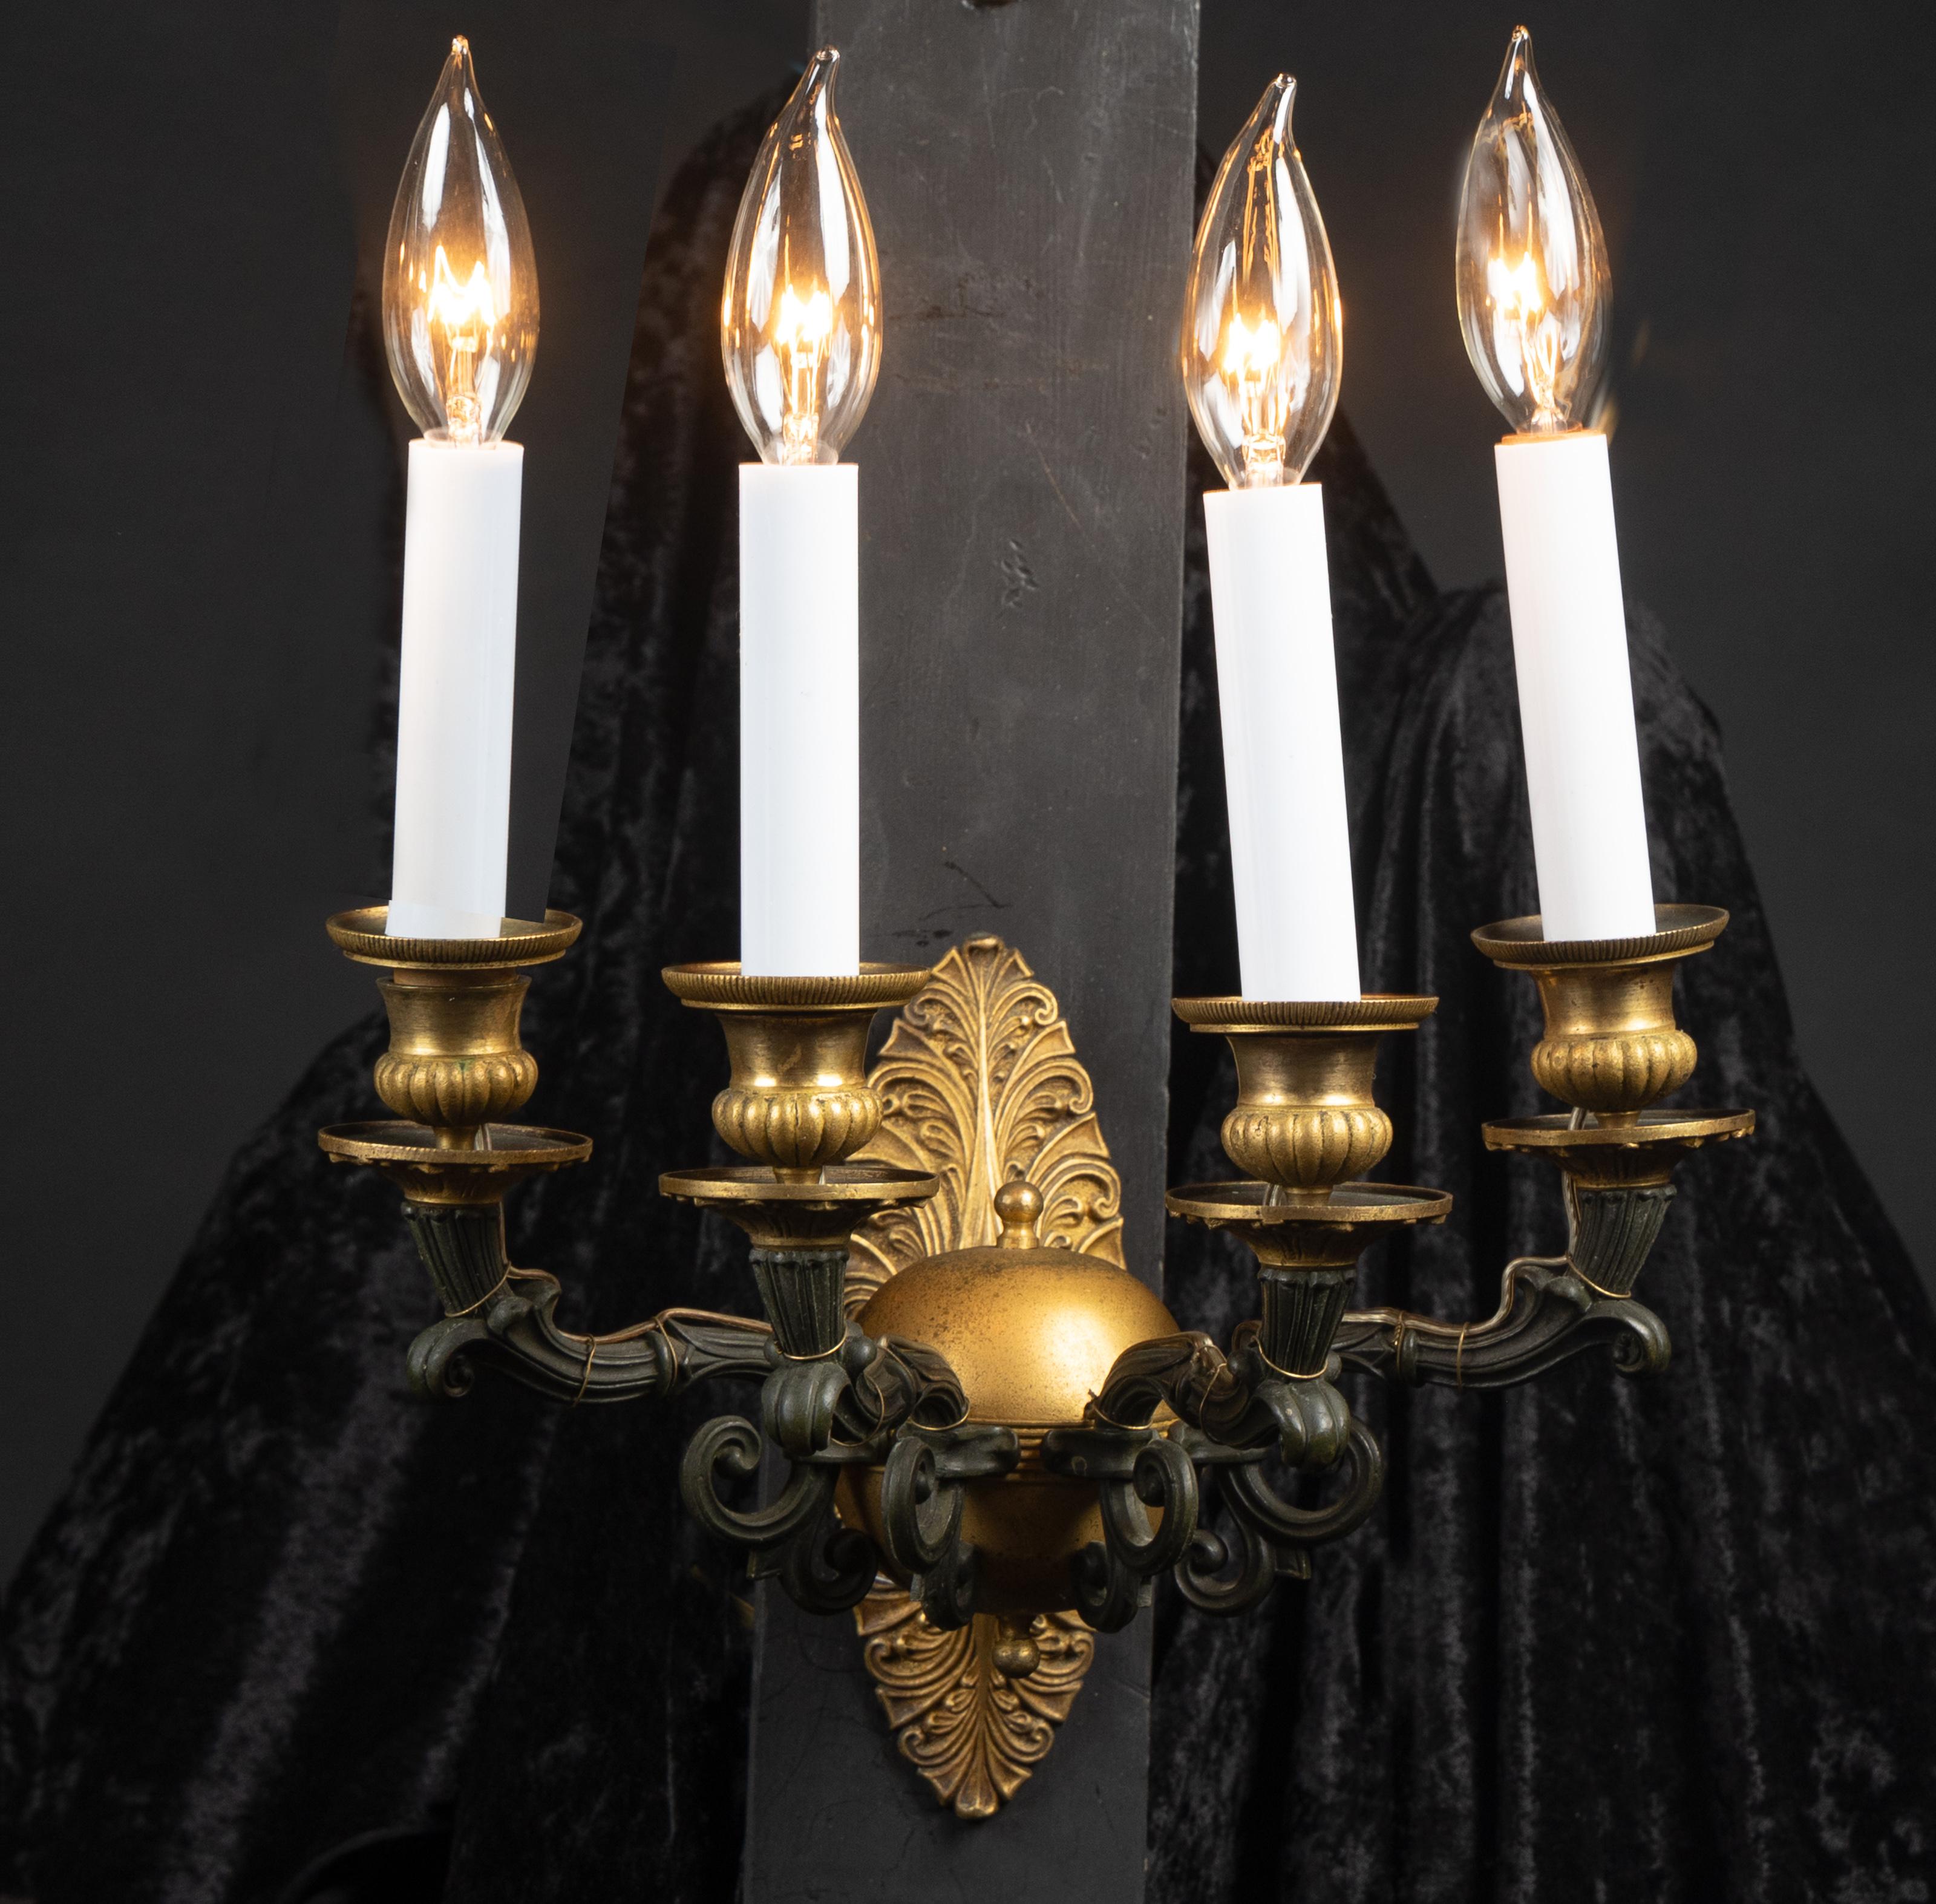 Exquisite French 19th century four-light bronze sconce with patinated bronze arms attached to large bronze orb in front of acanthus leaf backplate.  The sconces are adorned with bronze drippers, bronze candle cups in the shape of classic urns, and